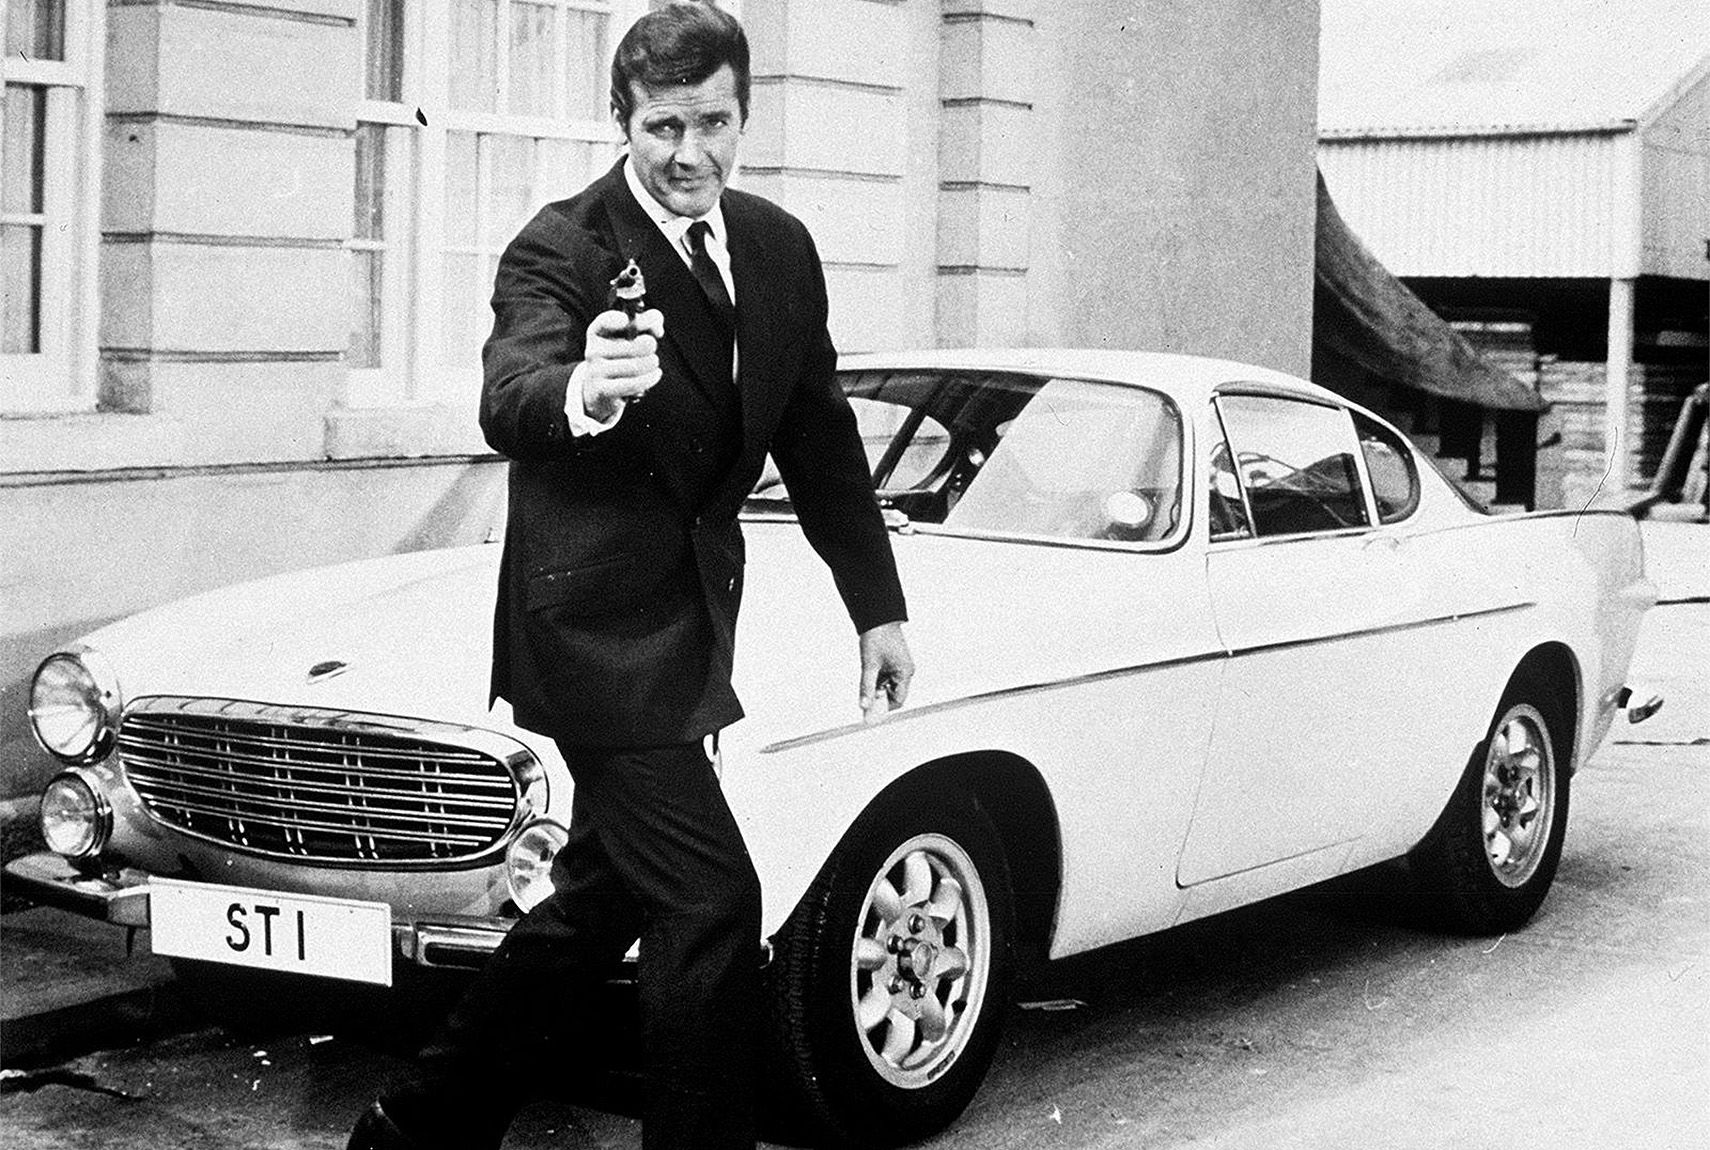 The Volvo P1800 Got Tons Of Exposure When It Became Roger Moore’s Car In The TV Series, "The Saint "